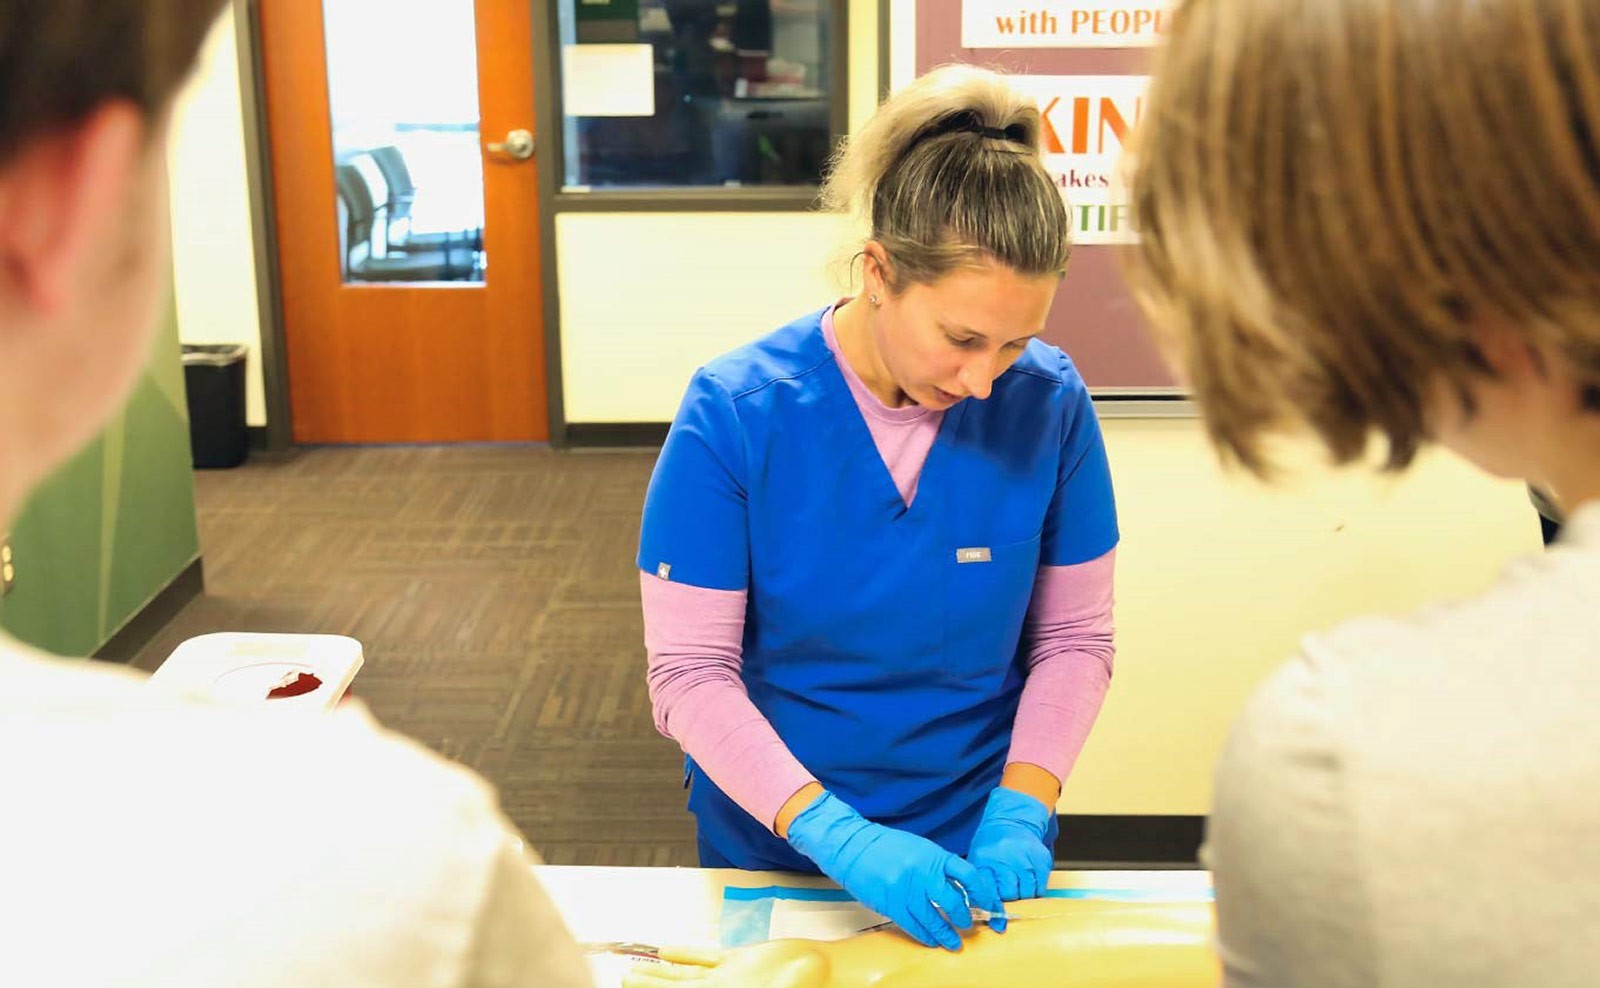 Shannon Swendsen, a nursing instructor at VPCC, provides hands-on activities at the college's open house in Williamsburg.